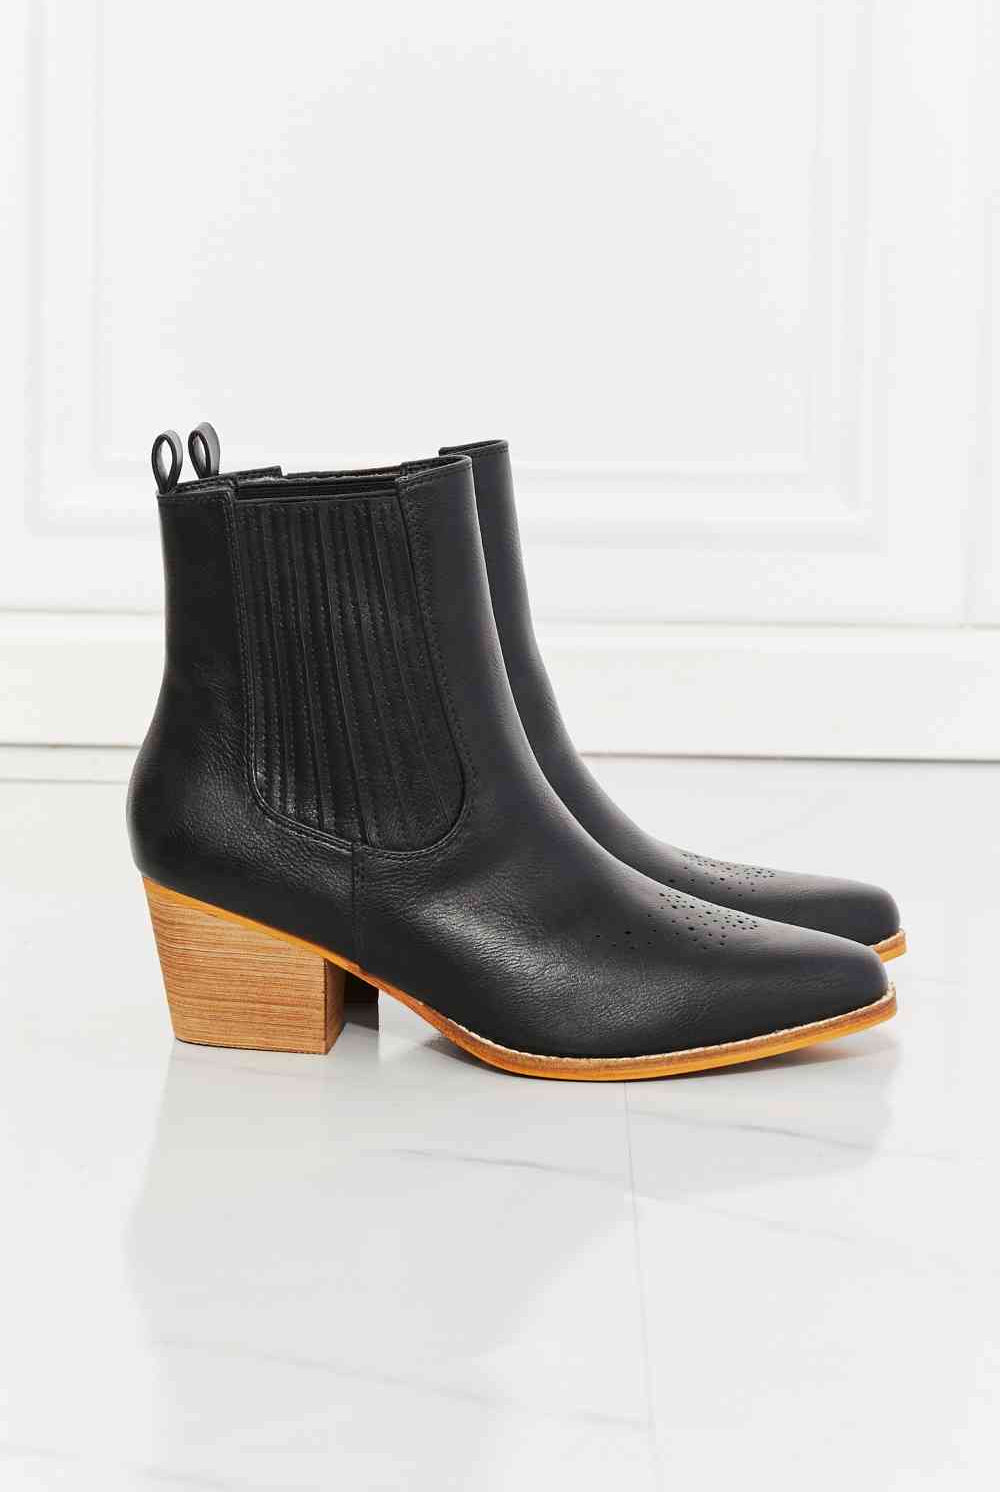 Lavender MMShoes Love the Journey Stacked Heel Chelsea Boot in Black Shoes